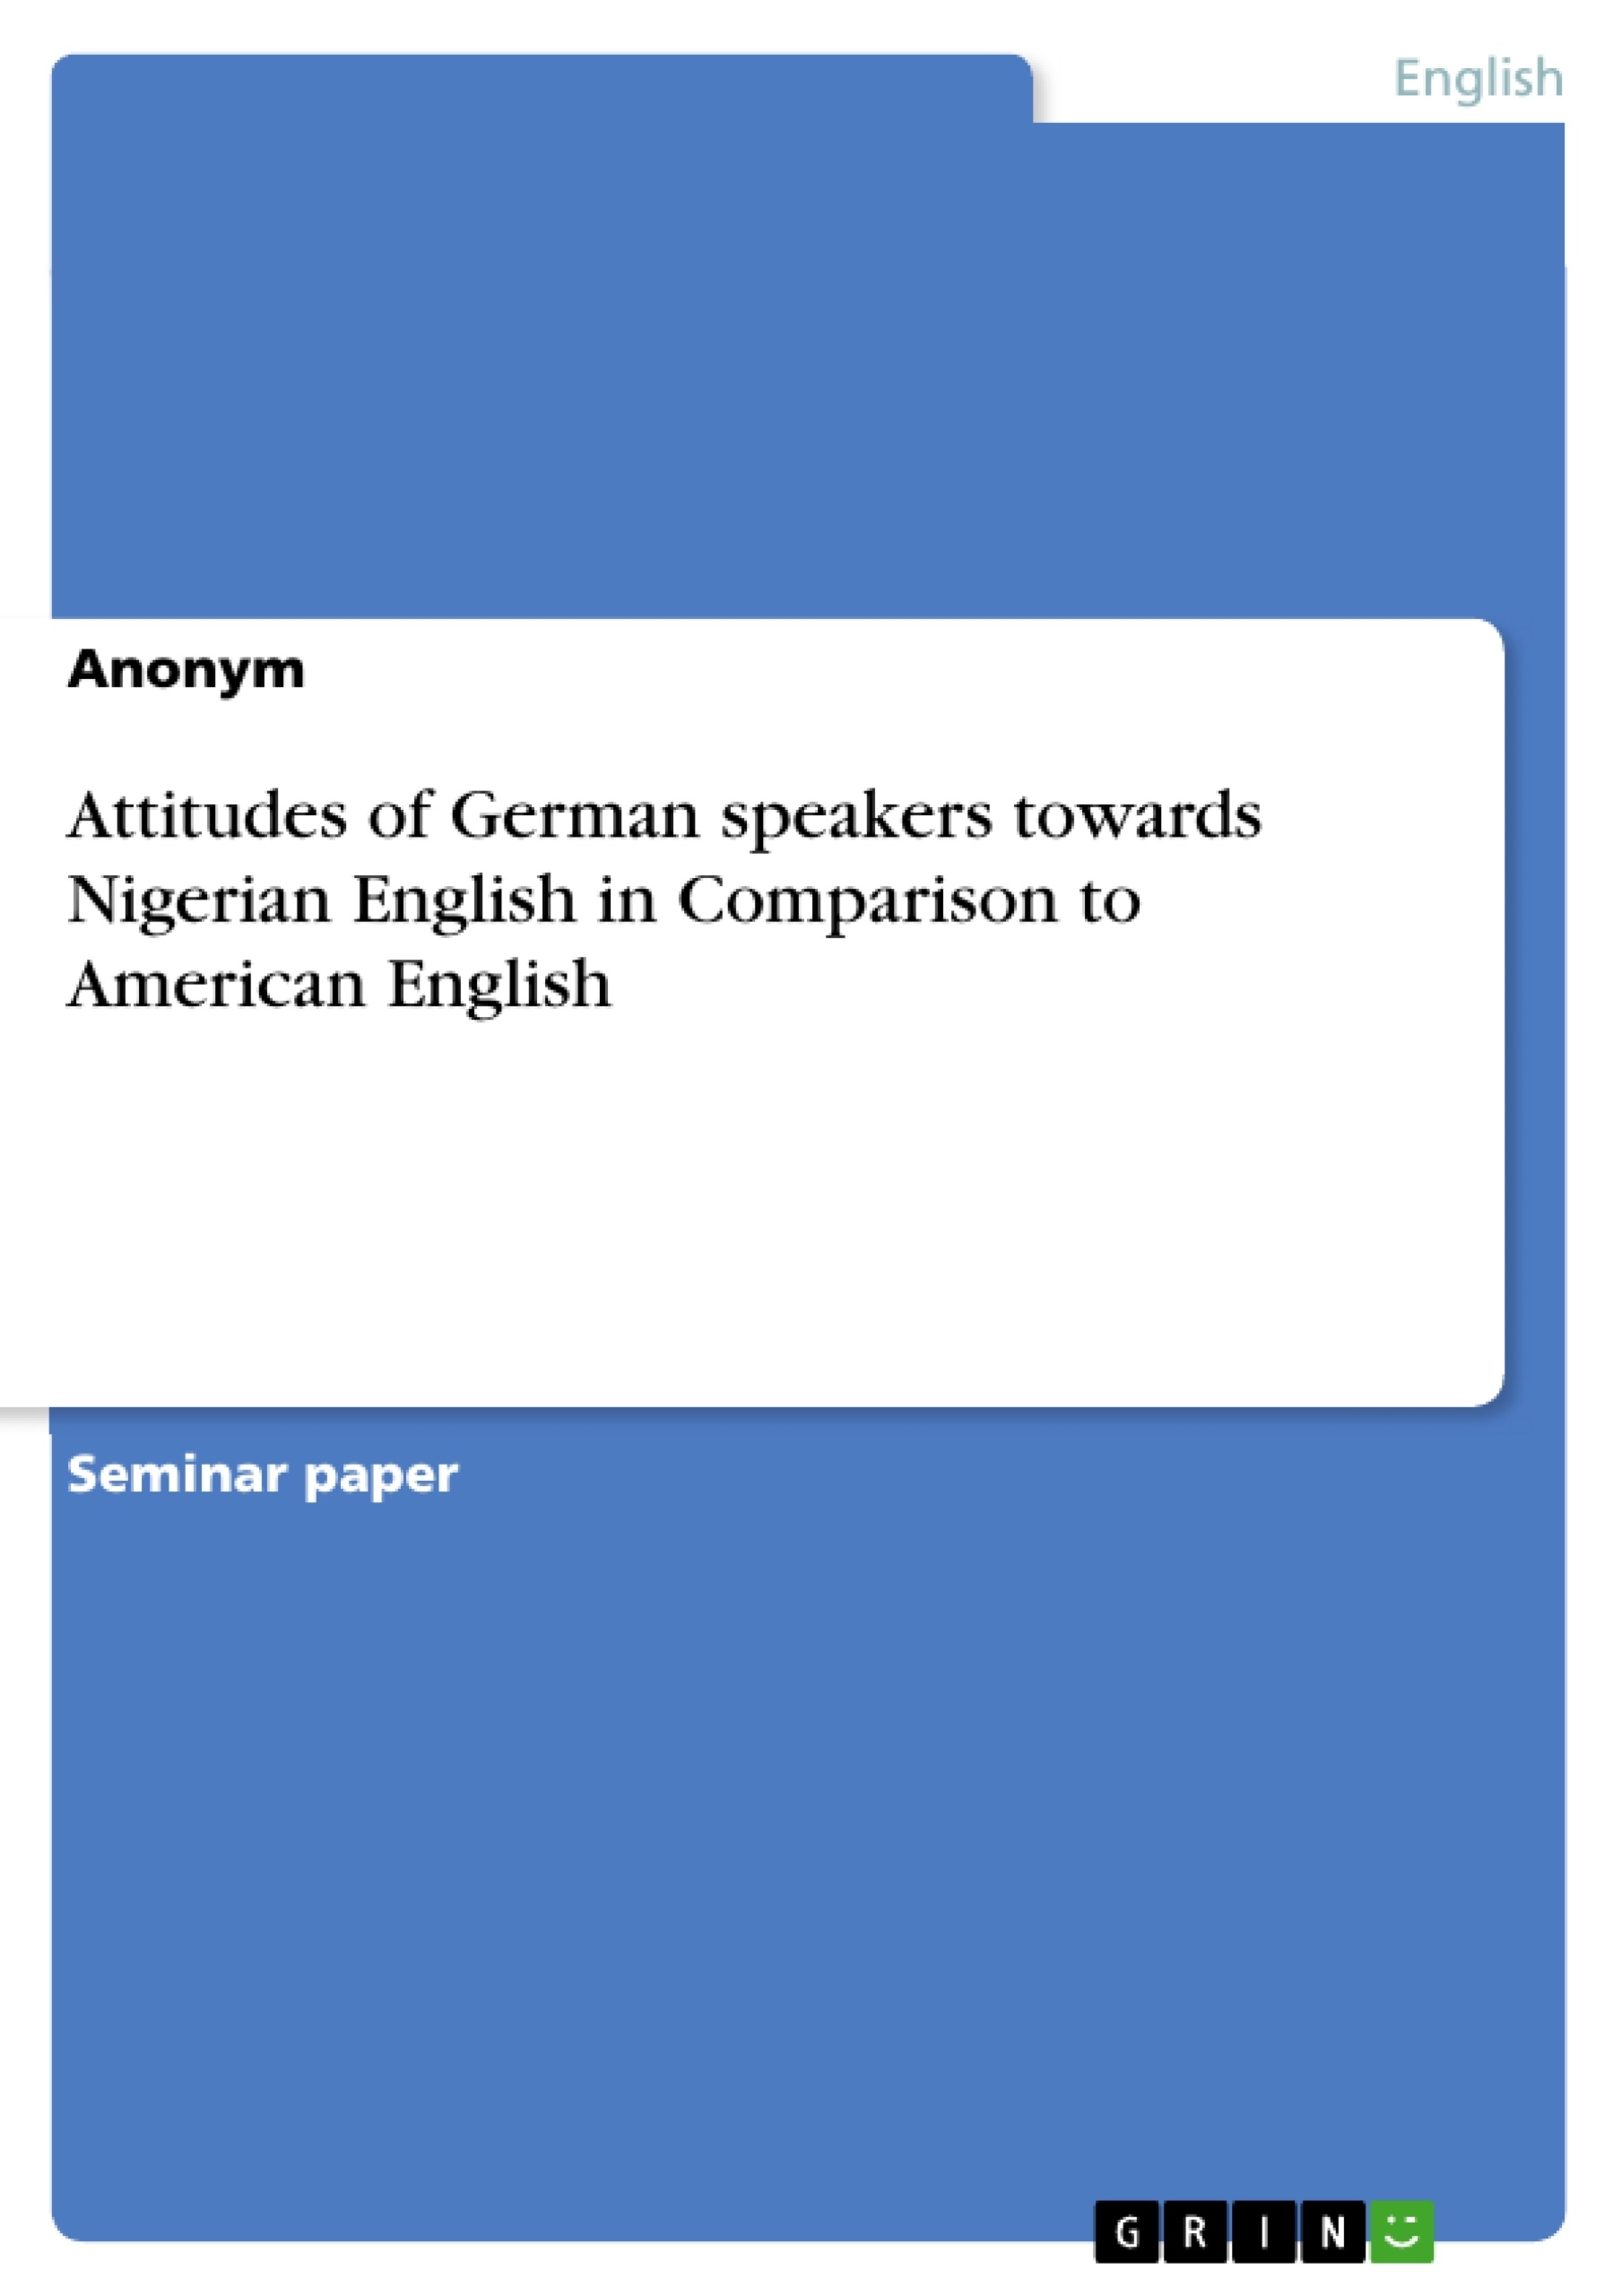 Title: Attitudes of German speakers towards Nigerian English in Comparison to American English